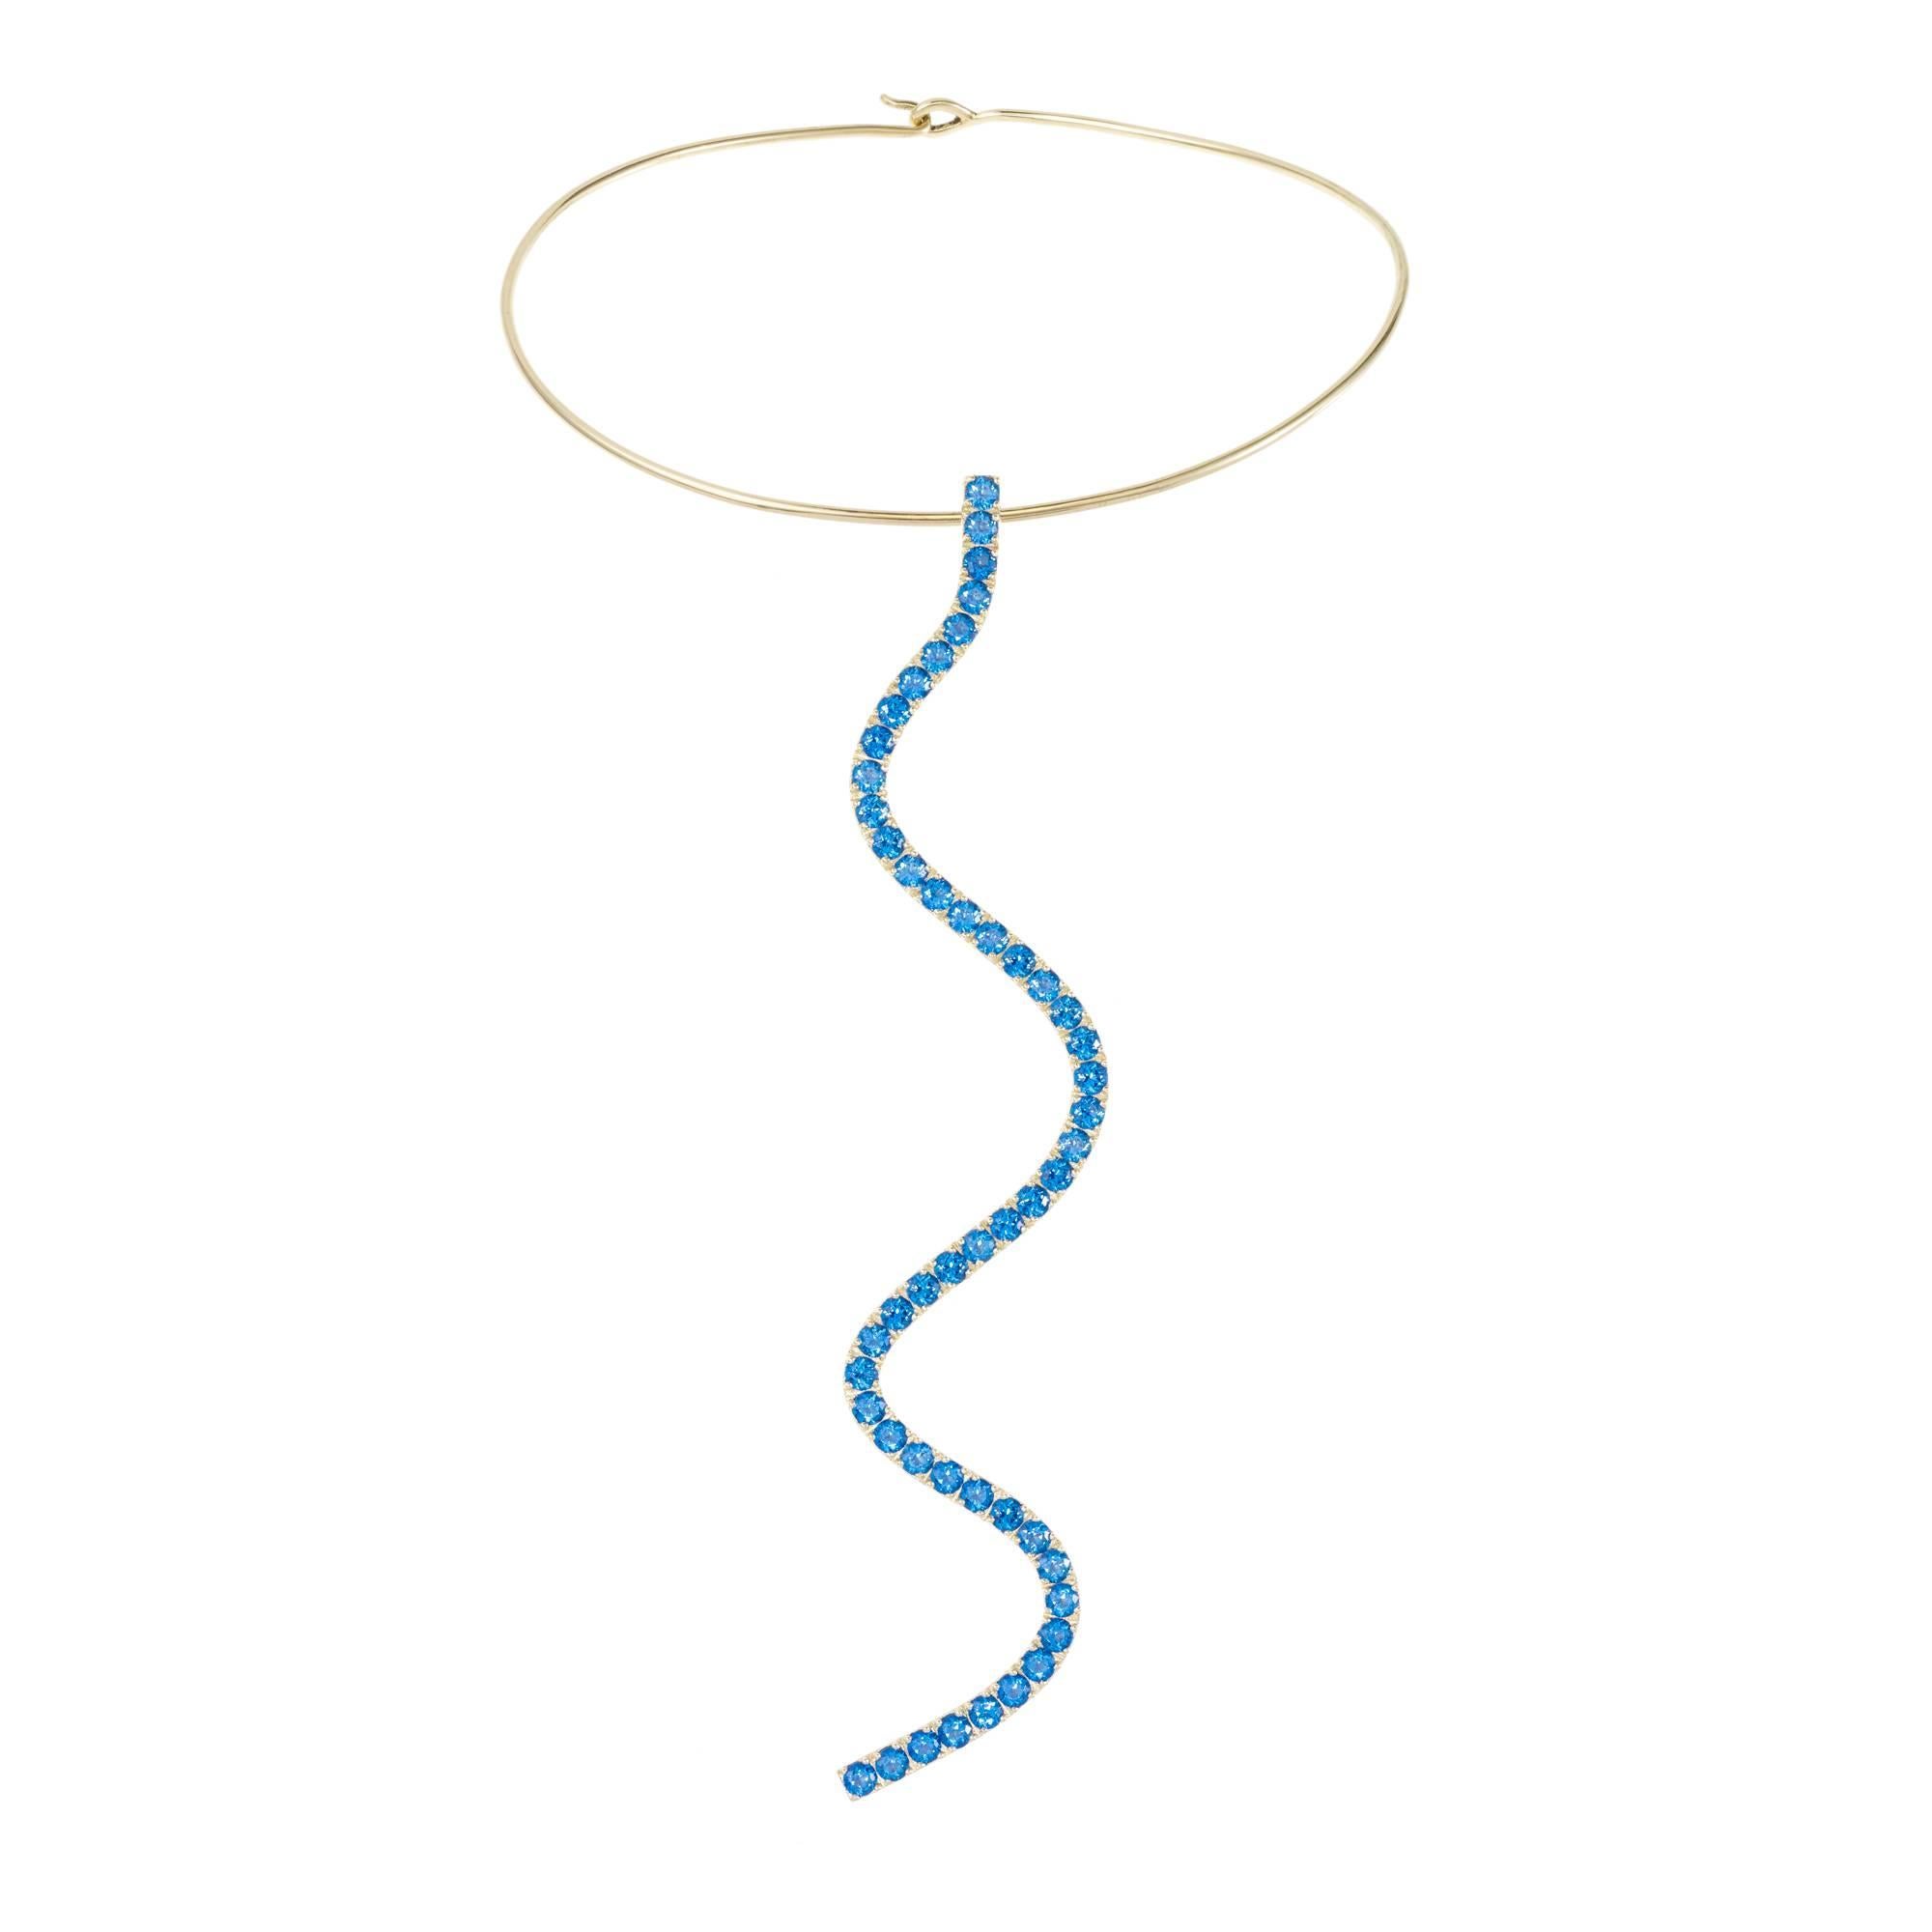 *MADE TO ORDER - 5 WEEK LEAD TIME*

Sabine Getty wiggly torque with wiggly pendant in 18k yellow gold set with blue topaz.
Topaz: 14.21ct

Yellow, pink, green and blue. Four colours inspired by the Memphis Group, the kookiest of Made in Italy